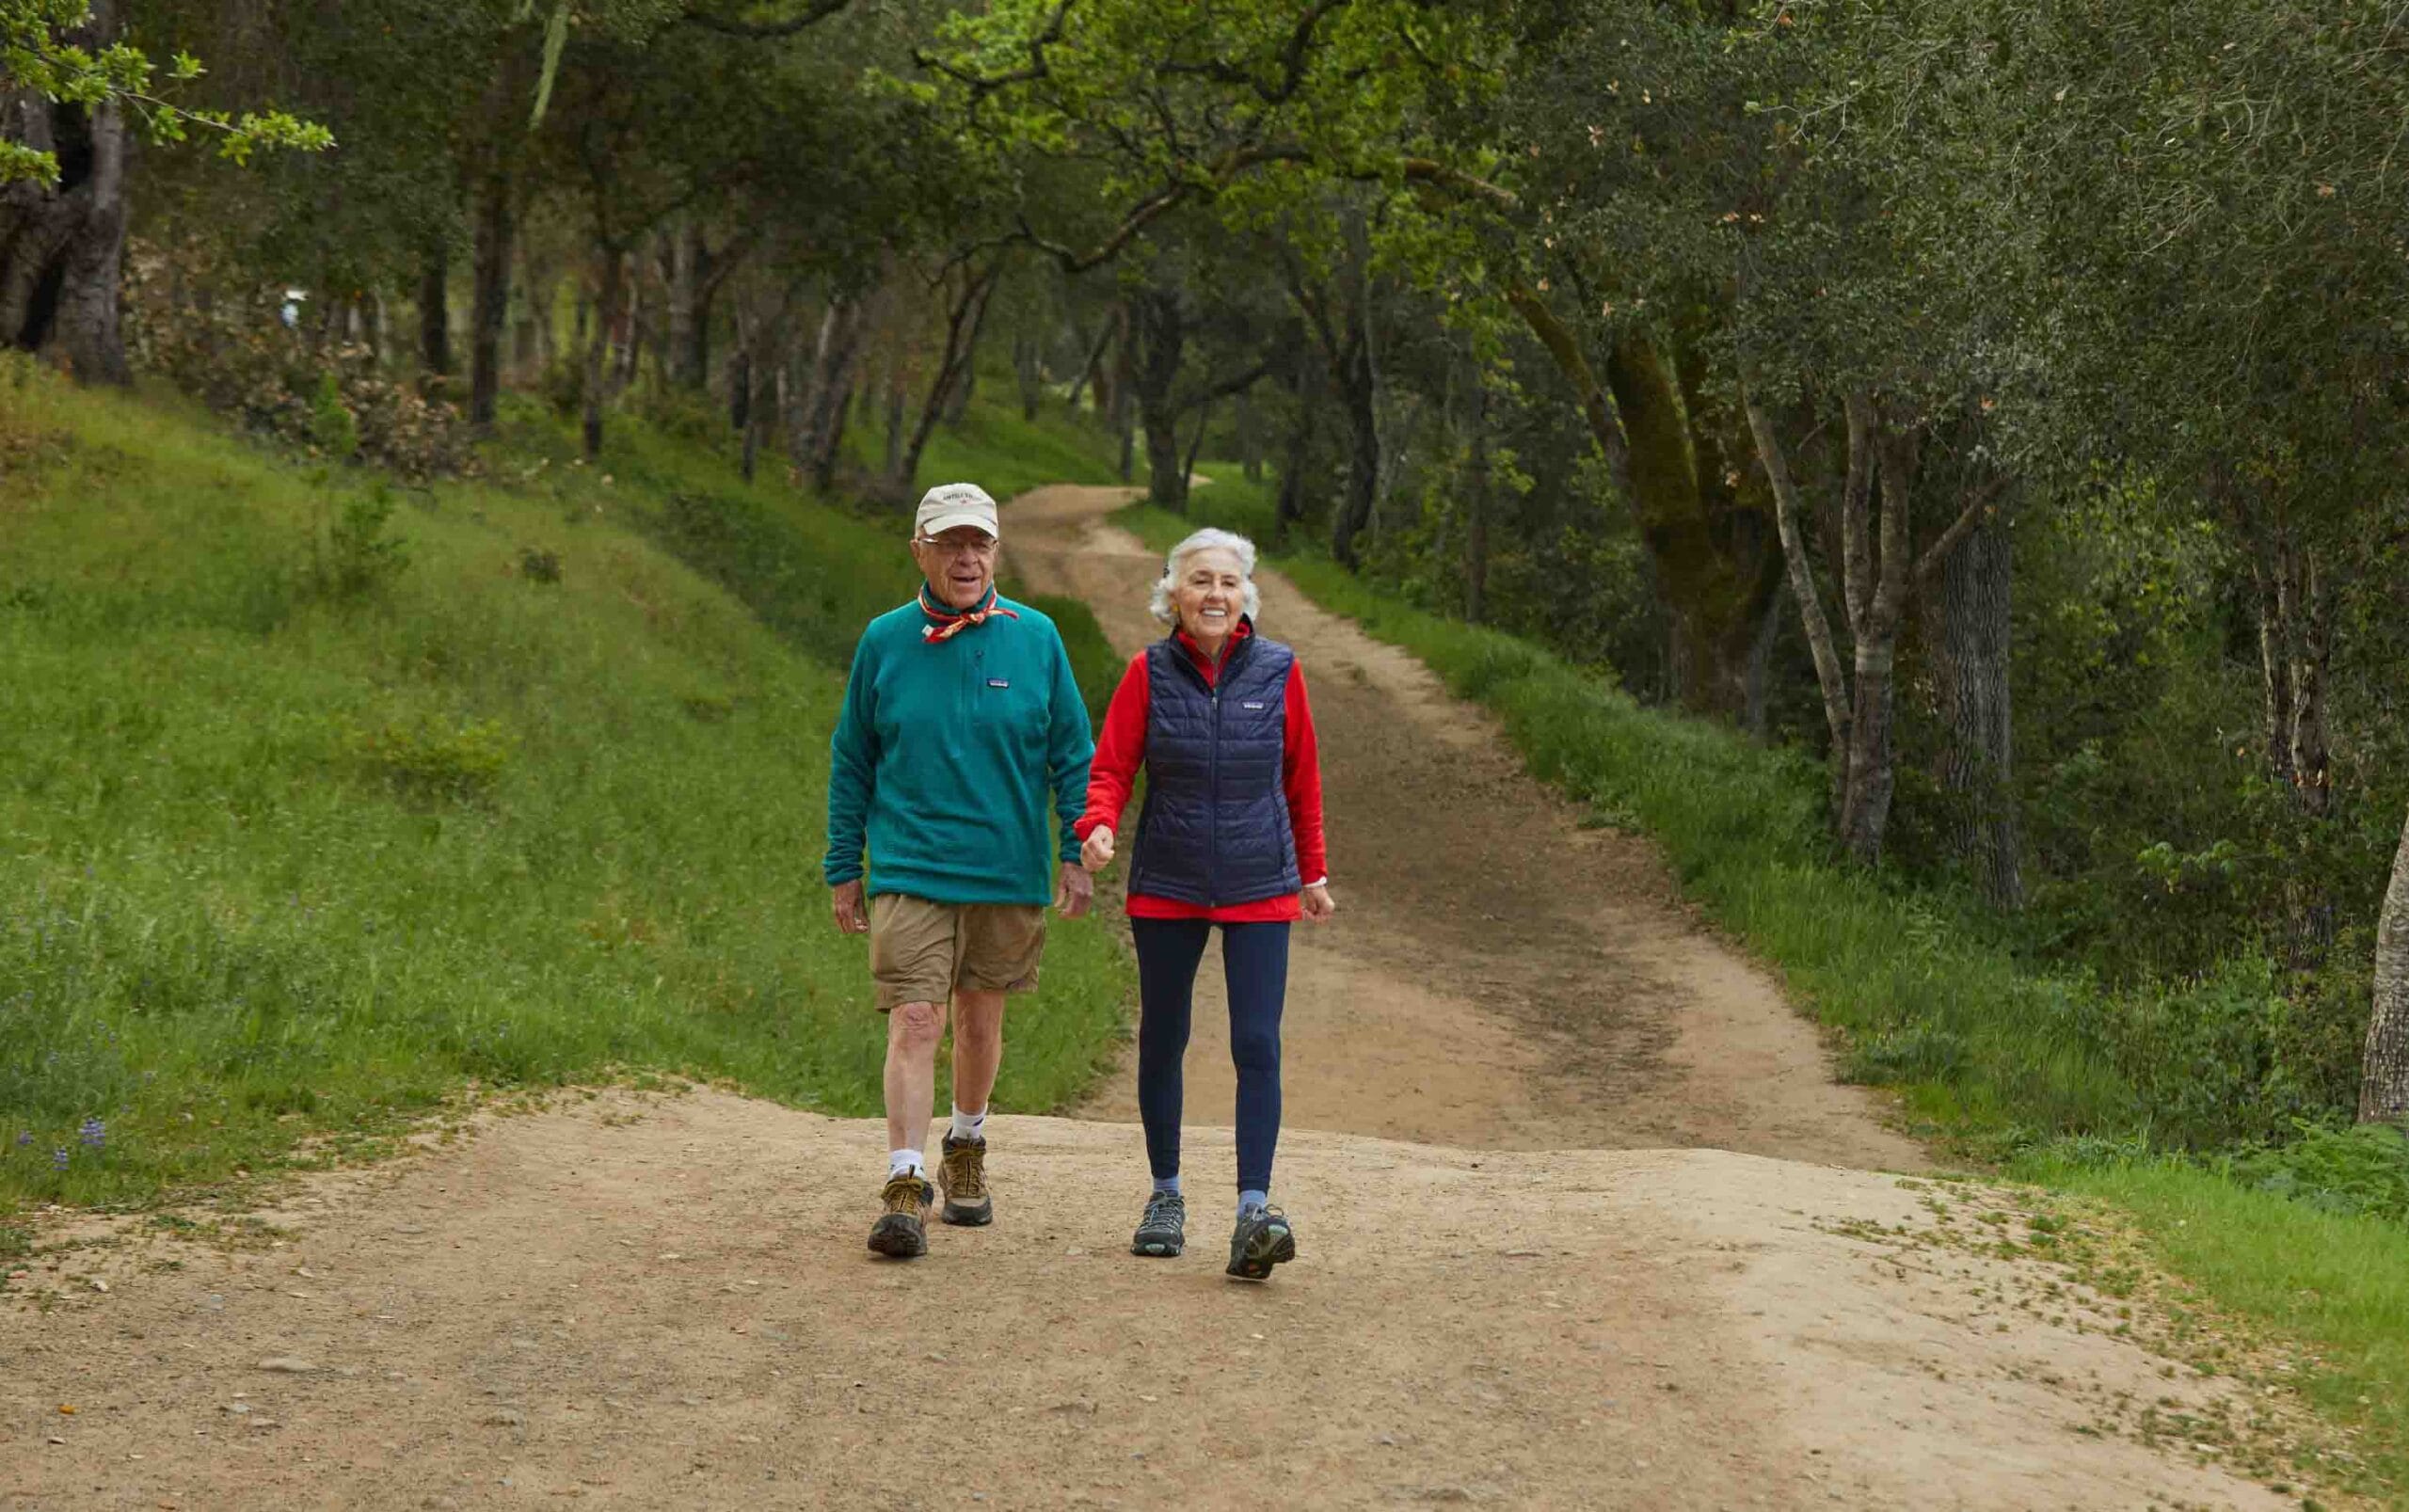 image shows an older couple walking a hiking trail